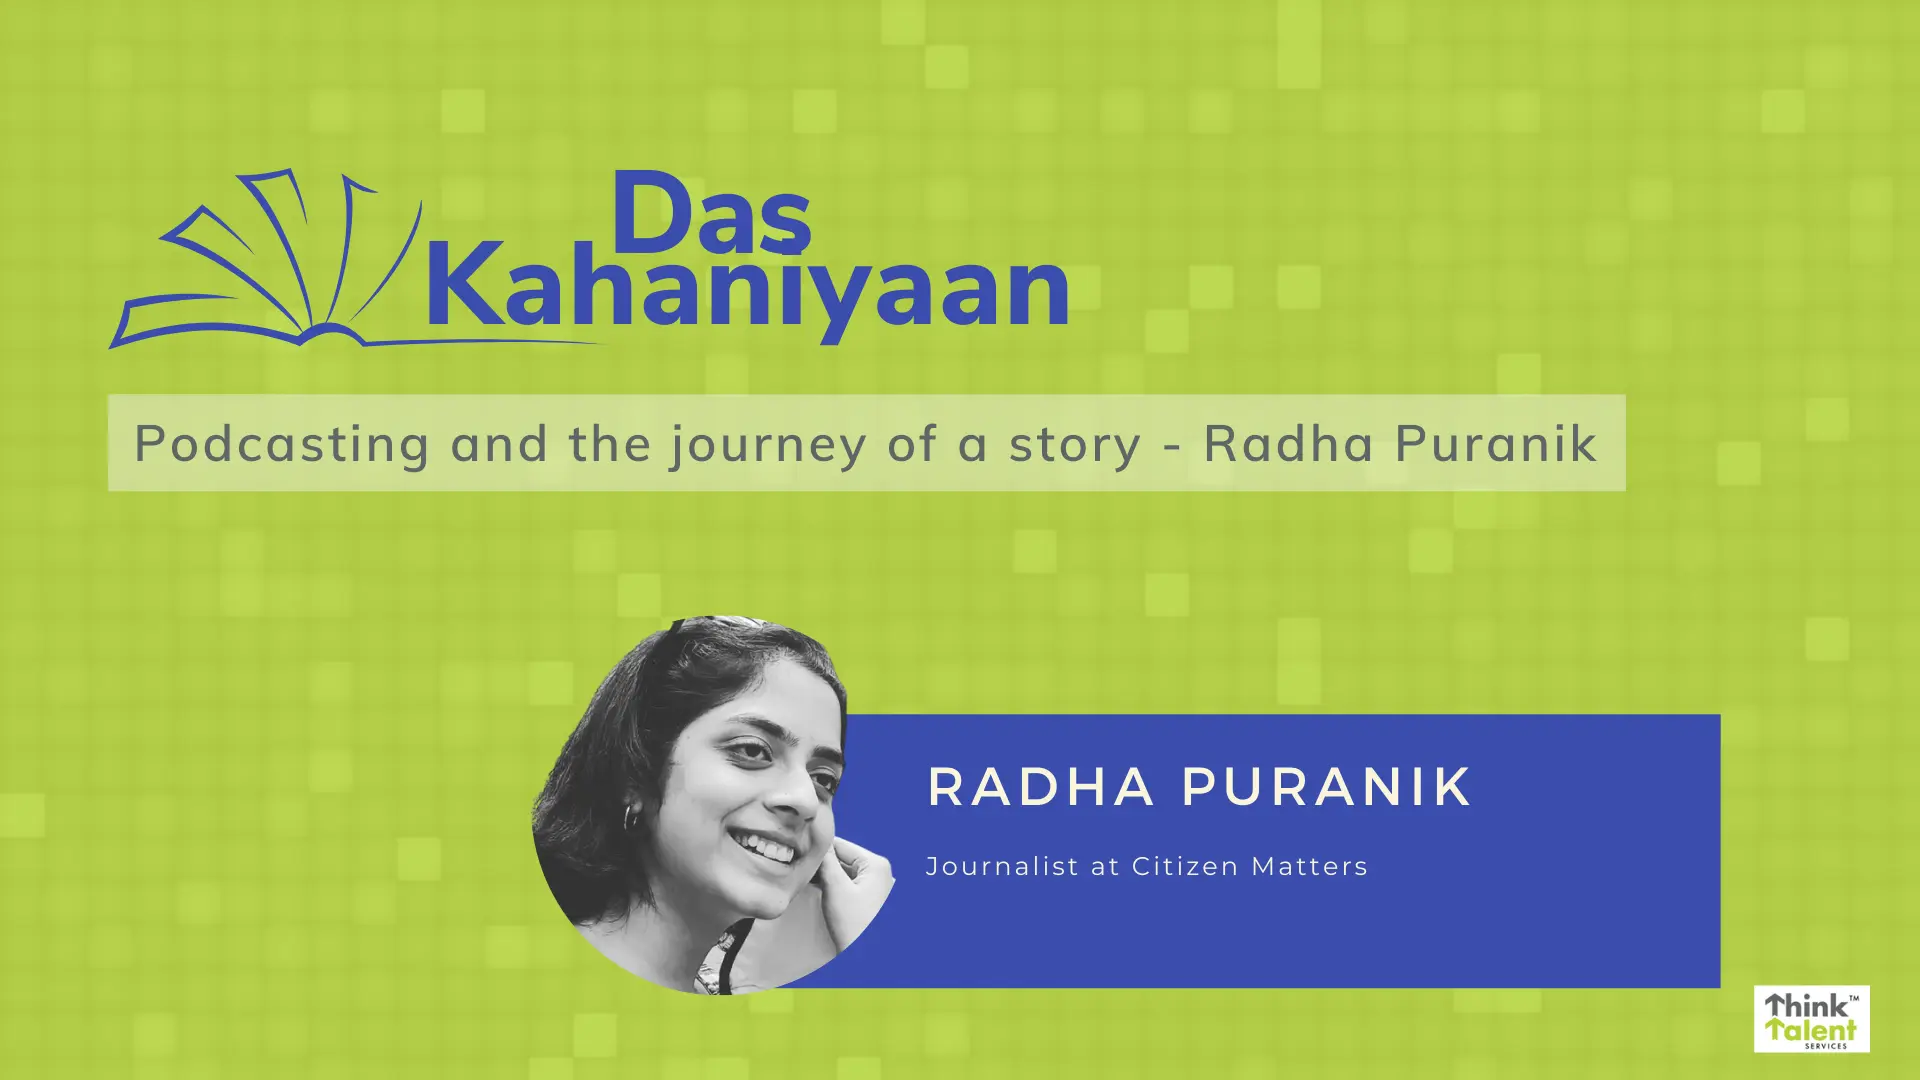 Radha Puranik: Podcasting and the journey of a story